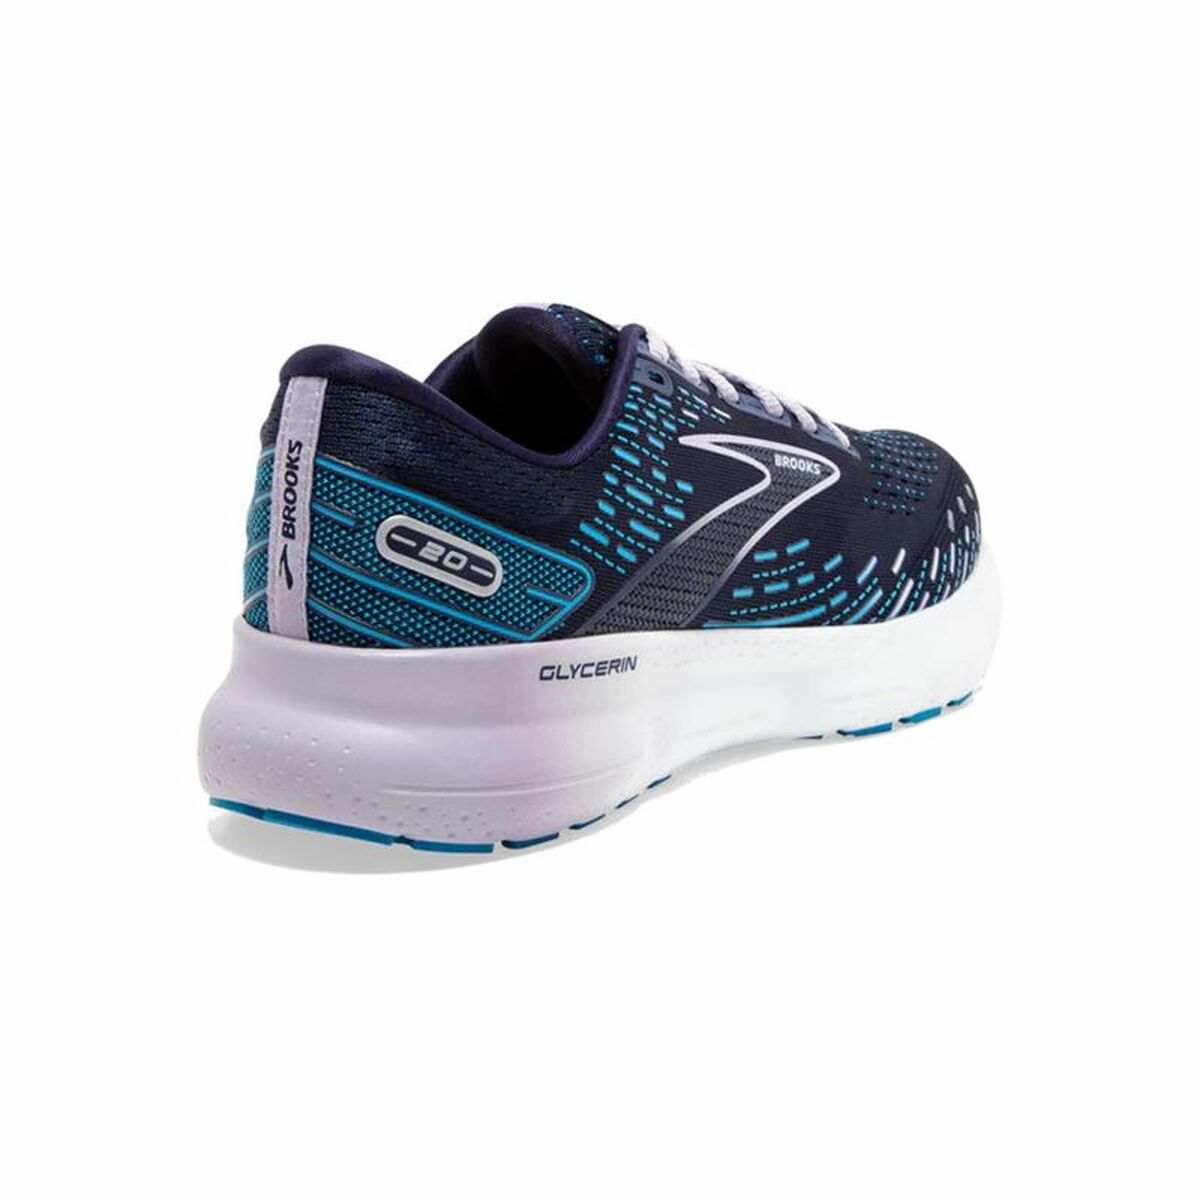 Running Shoes for Adults Brooks Glycerin 20 Wide Dark blue